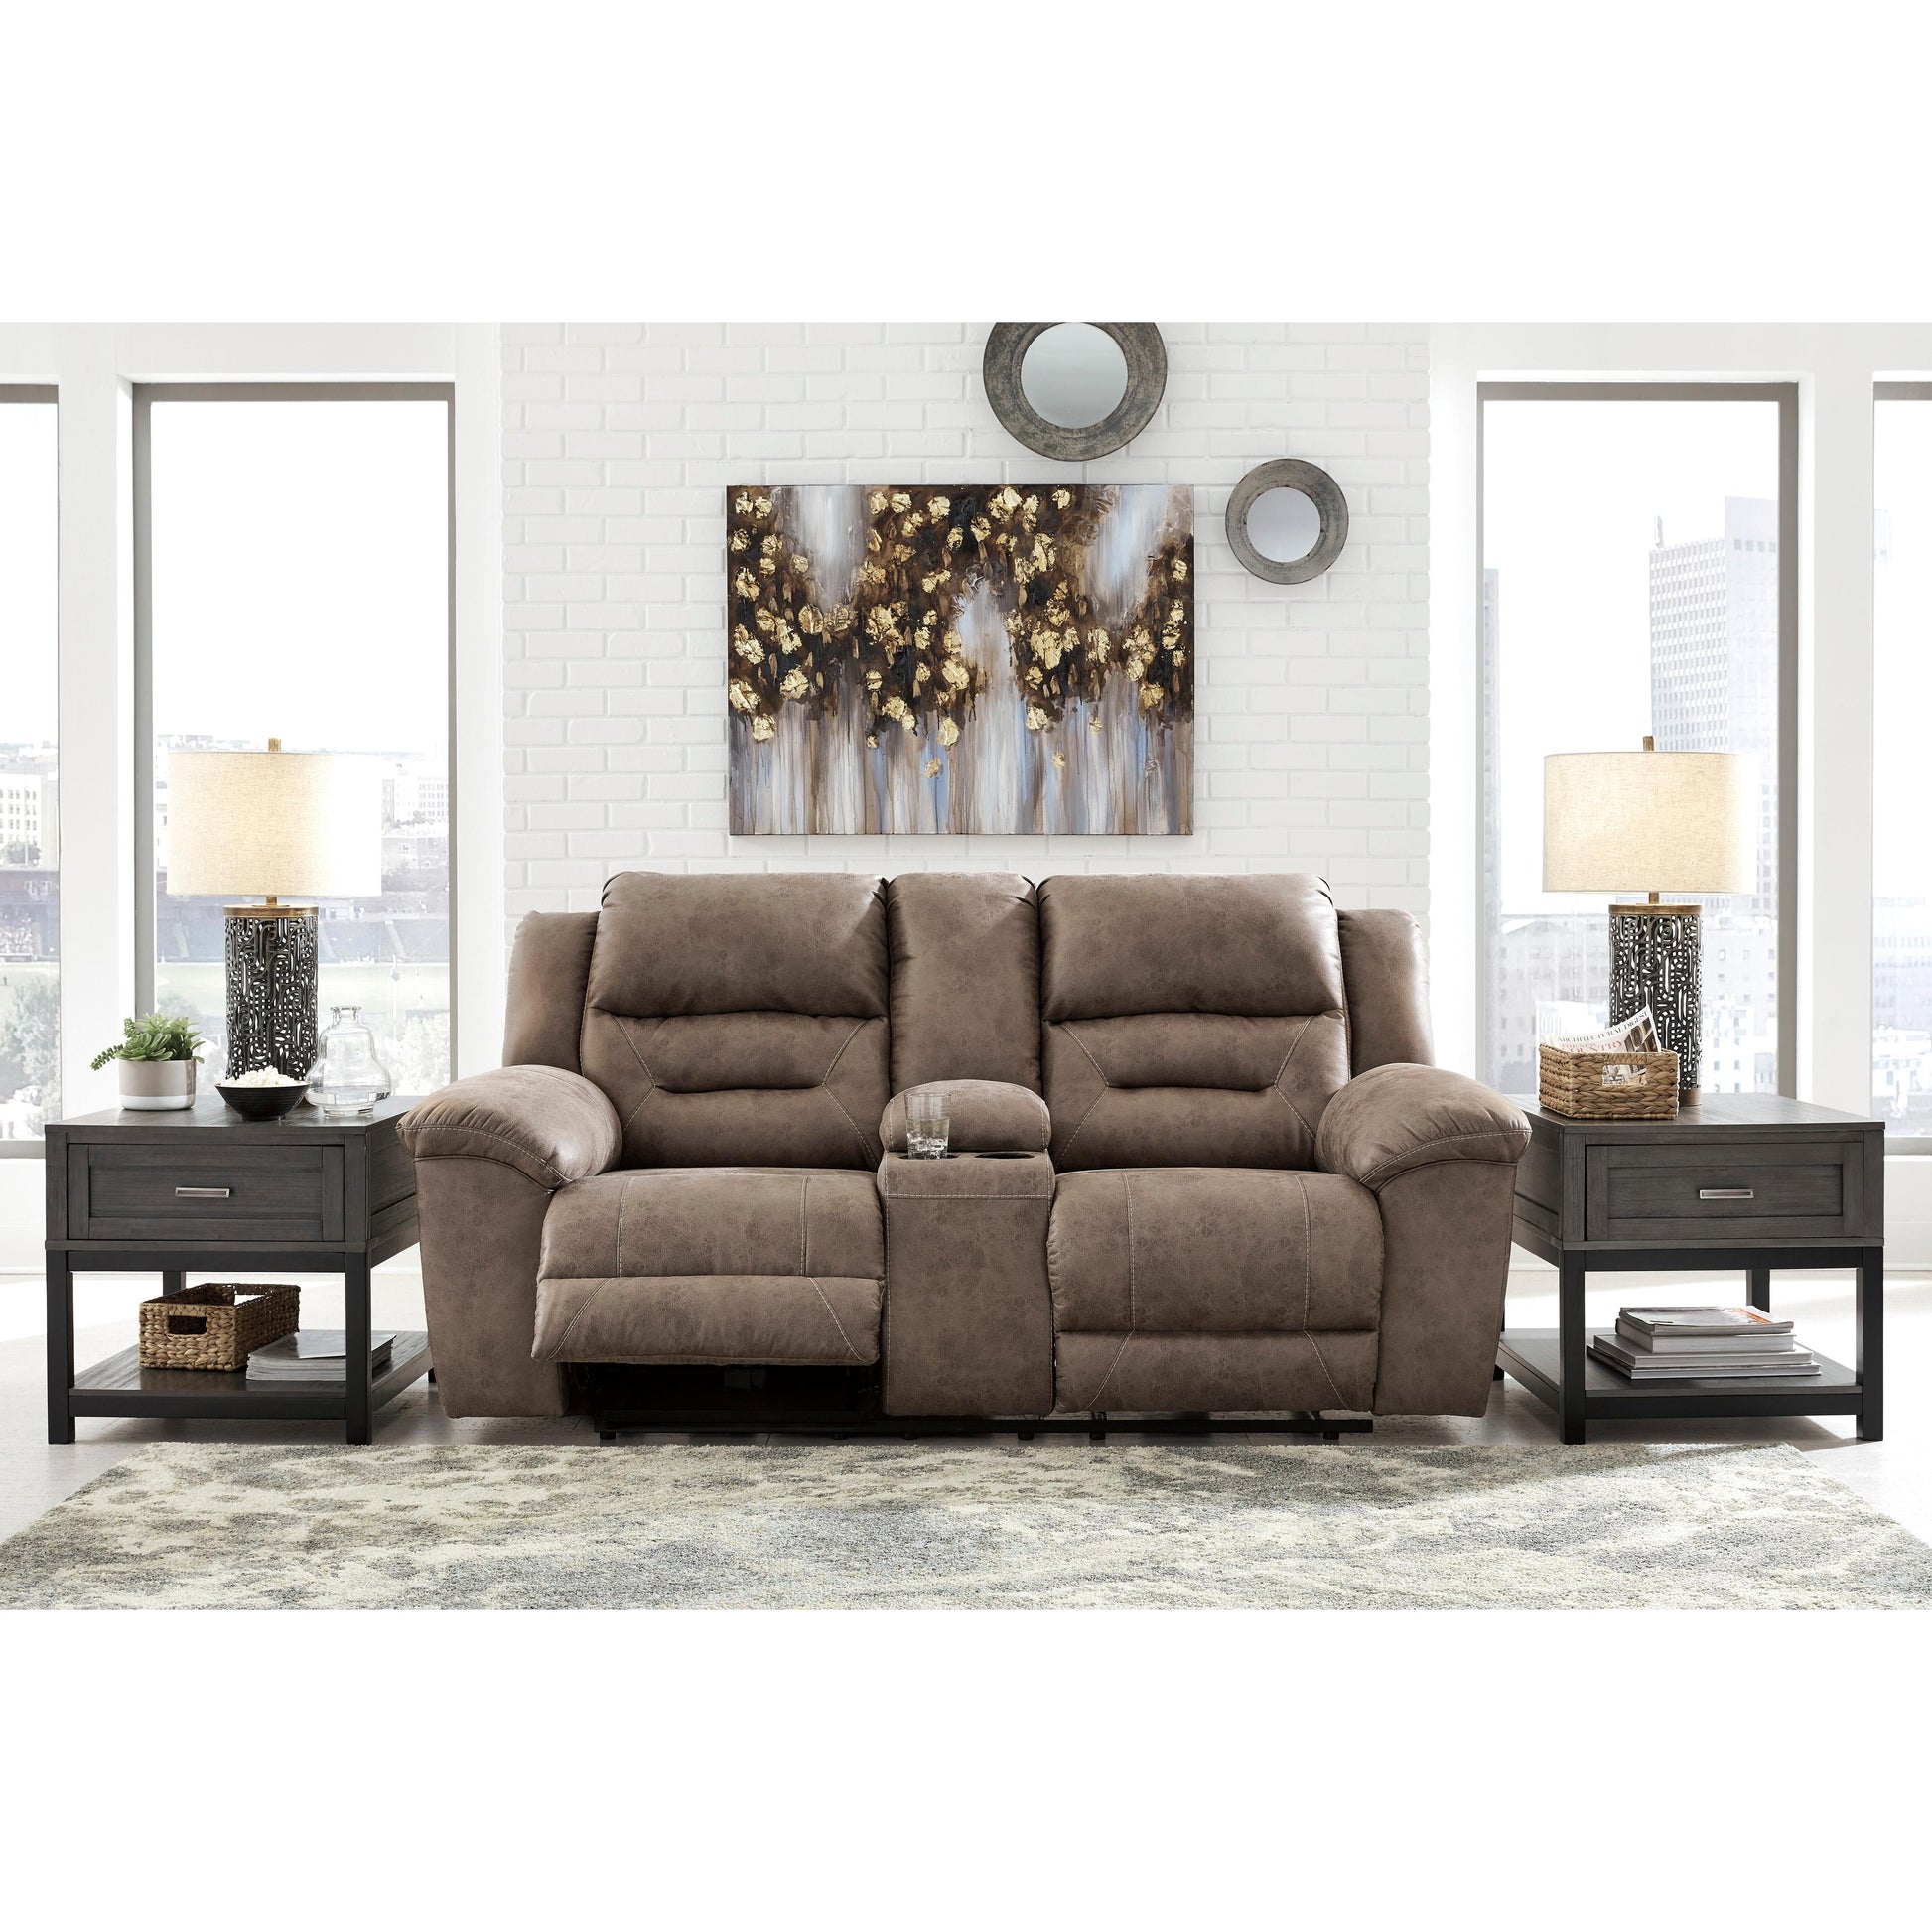 Signature Design by Ashley Stoneland Power Reclining Leather Look Loveseat 3990596